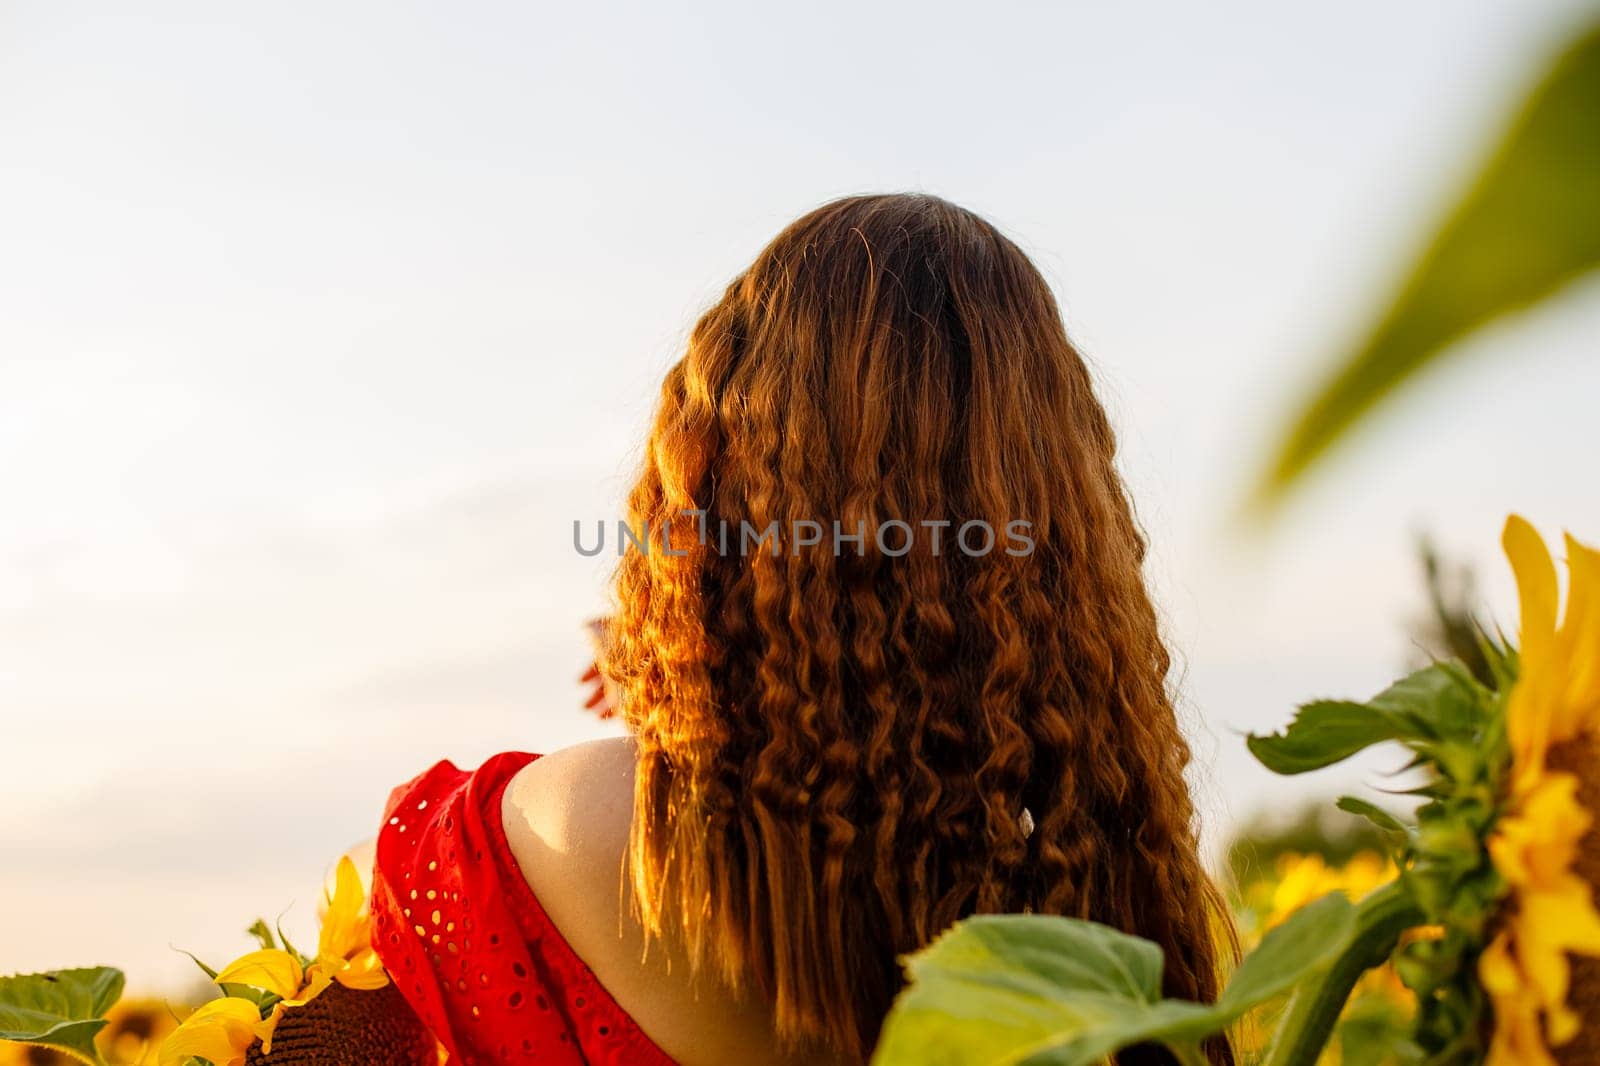 Girl with long hair stands with her back in field of blooming sunflowers in the rays of the setting sun. Beauty in nature. Free young woman enjoying the freshness of the evening